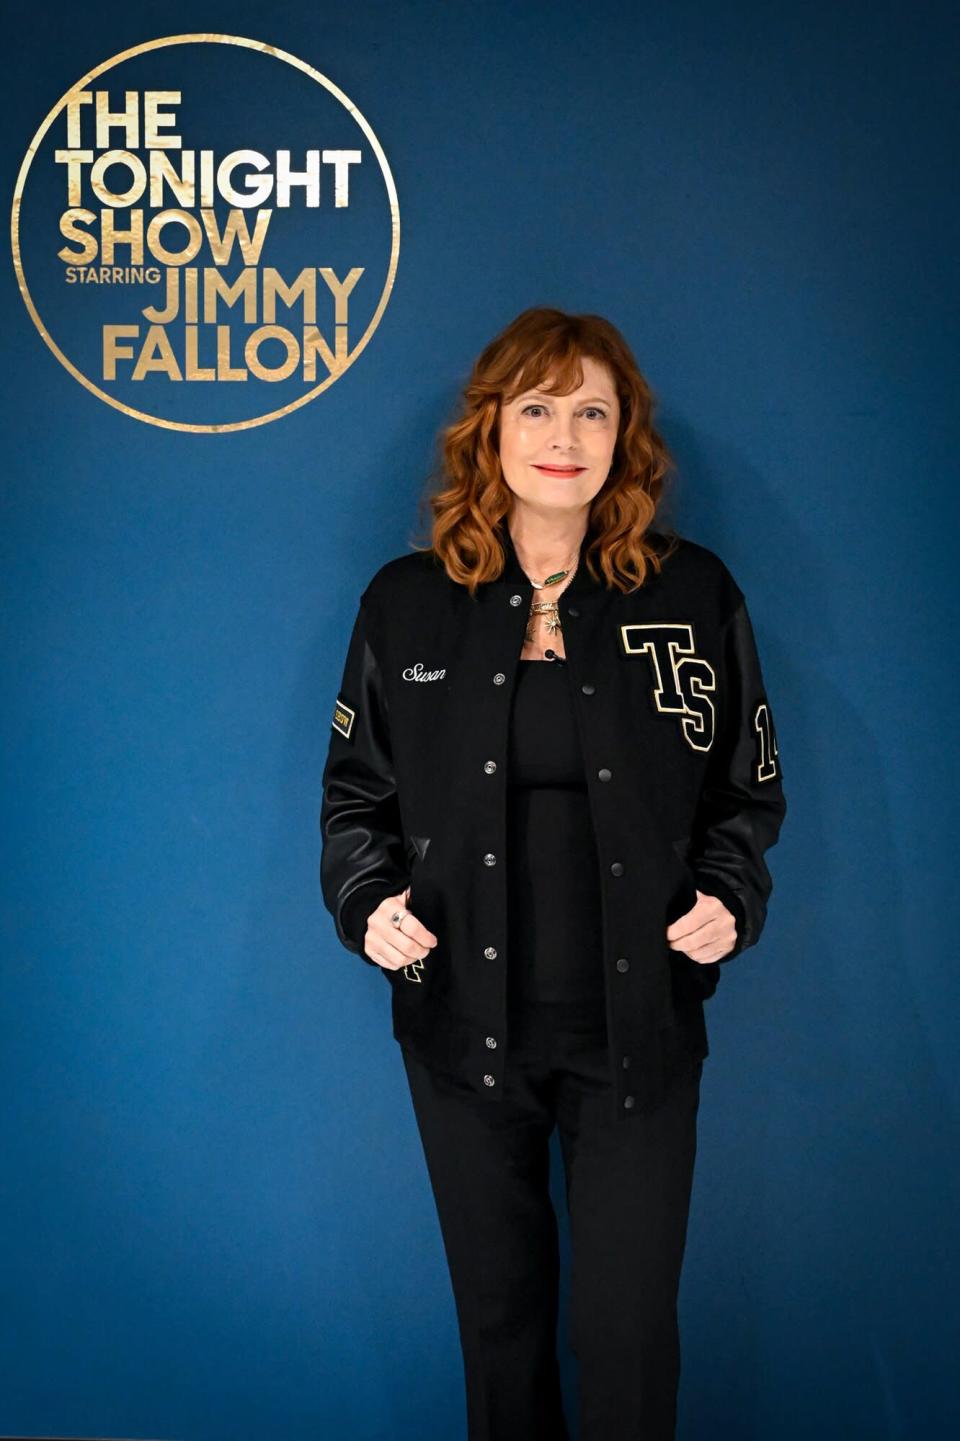 THE TONIGHT SHOW STARRING JIMMY FALLON -- Episode 1704 -- Pictured: Actress Susan Sarandon poses backstage on Wednesday, September 7, 2022